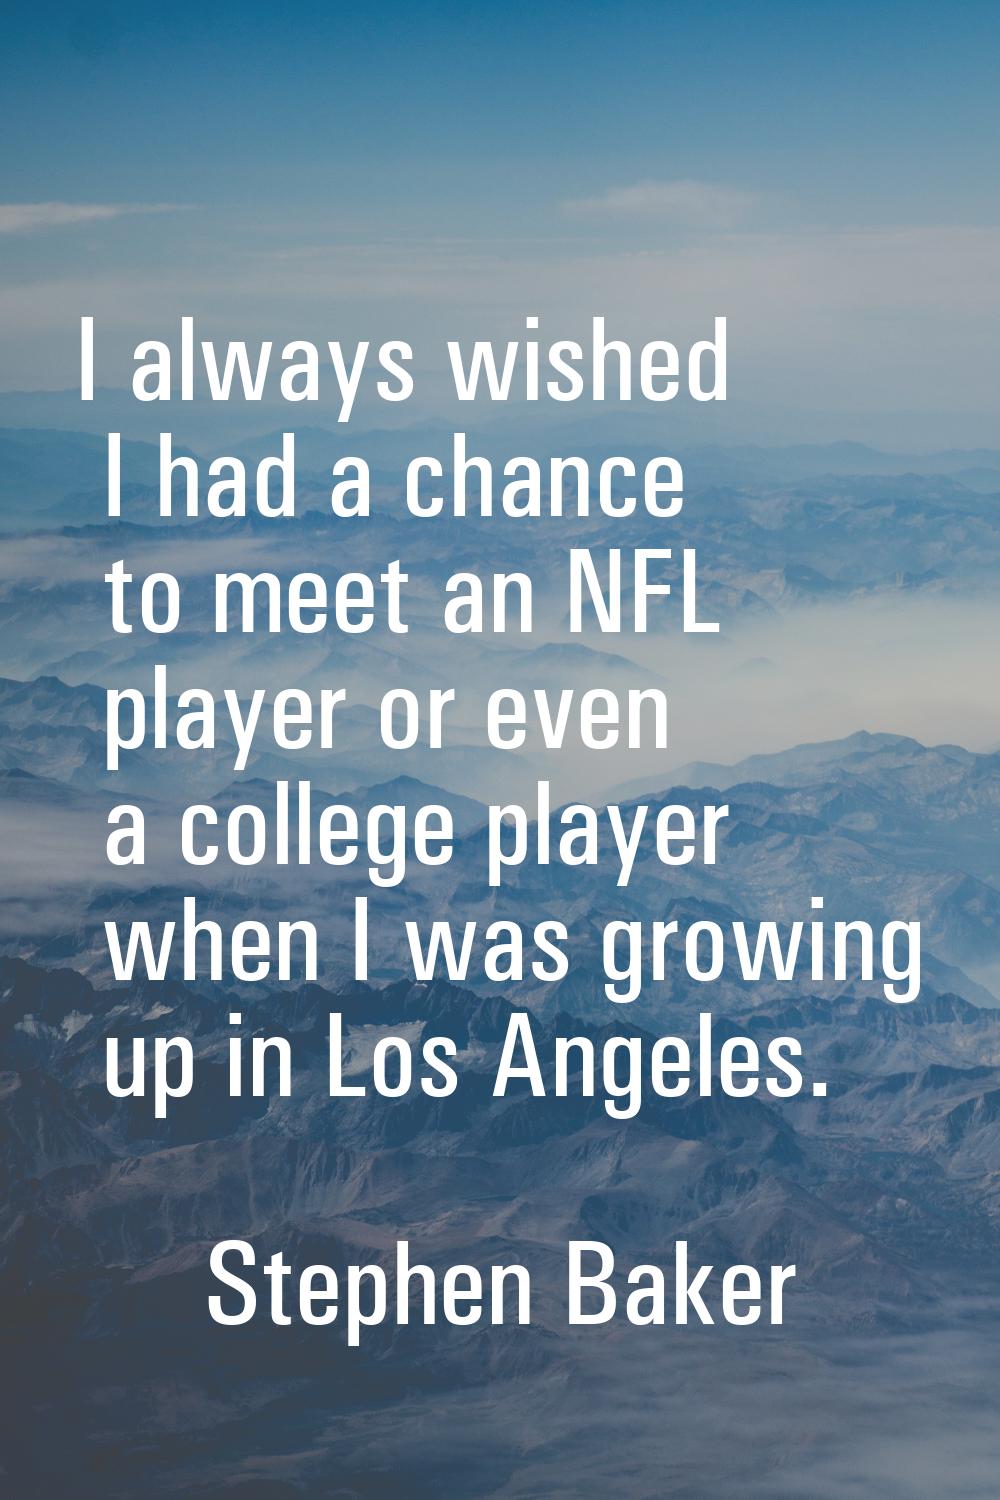 I always wished I had a chance to meet an NFL player or even a college player when I was growing up